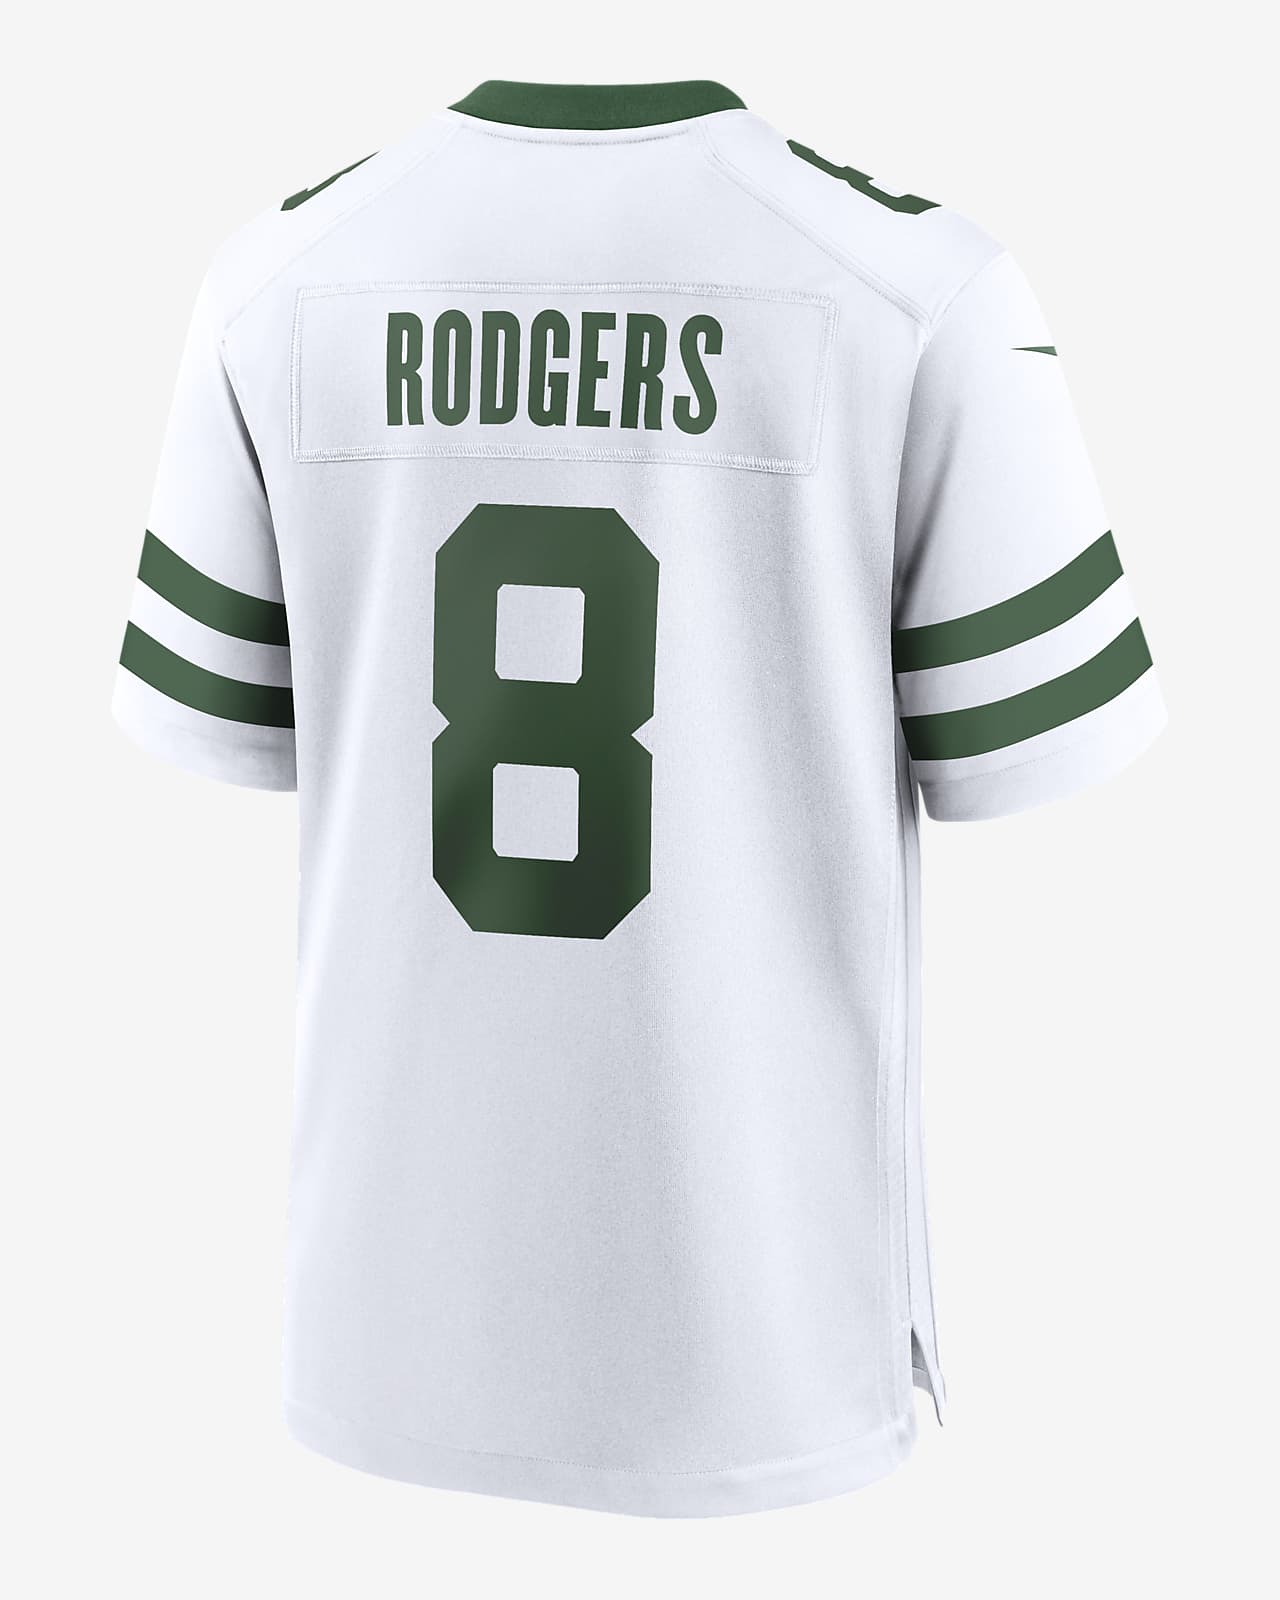 number one nfl jersey sale